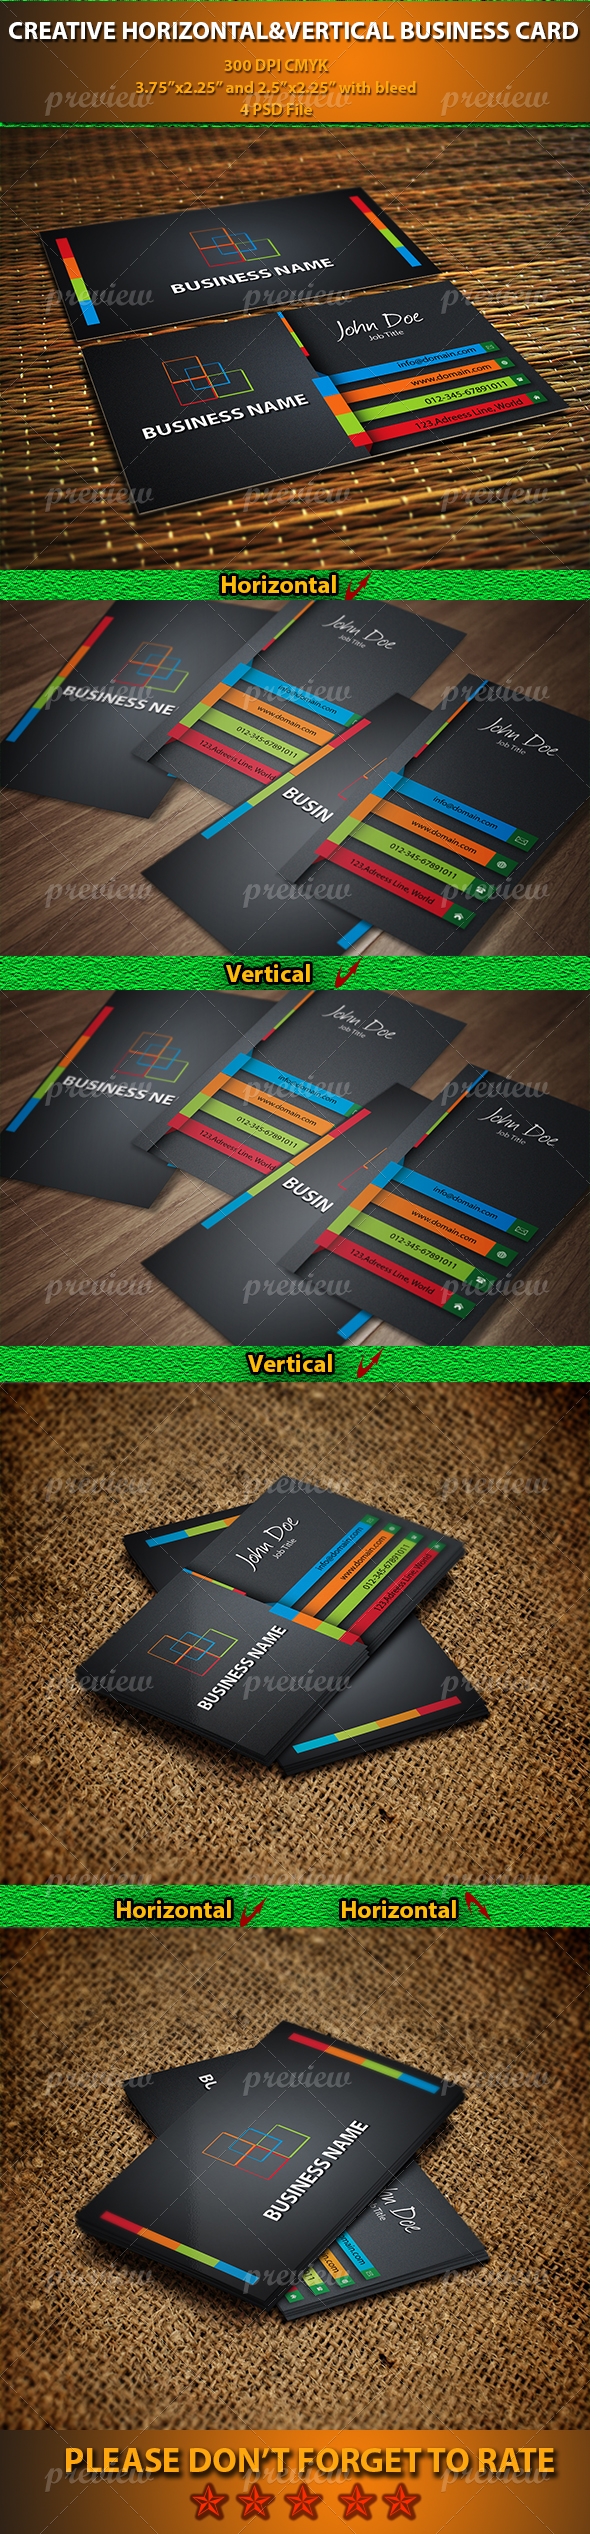 Creative Horizontal and Vertical Business Card